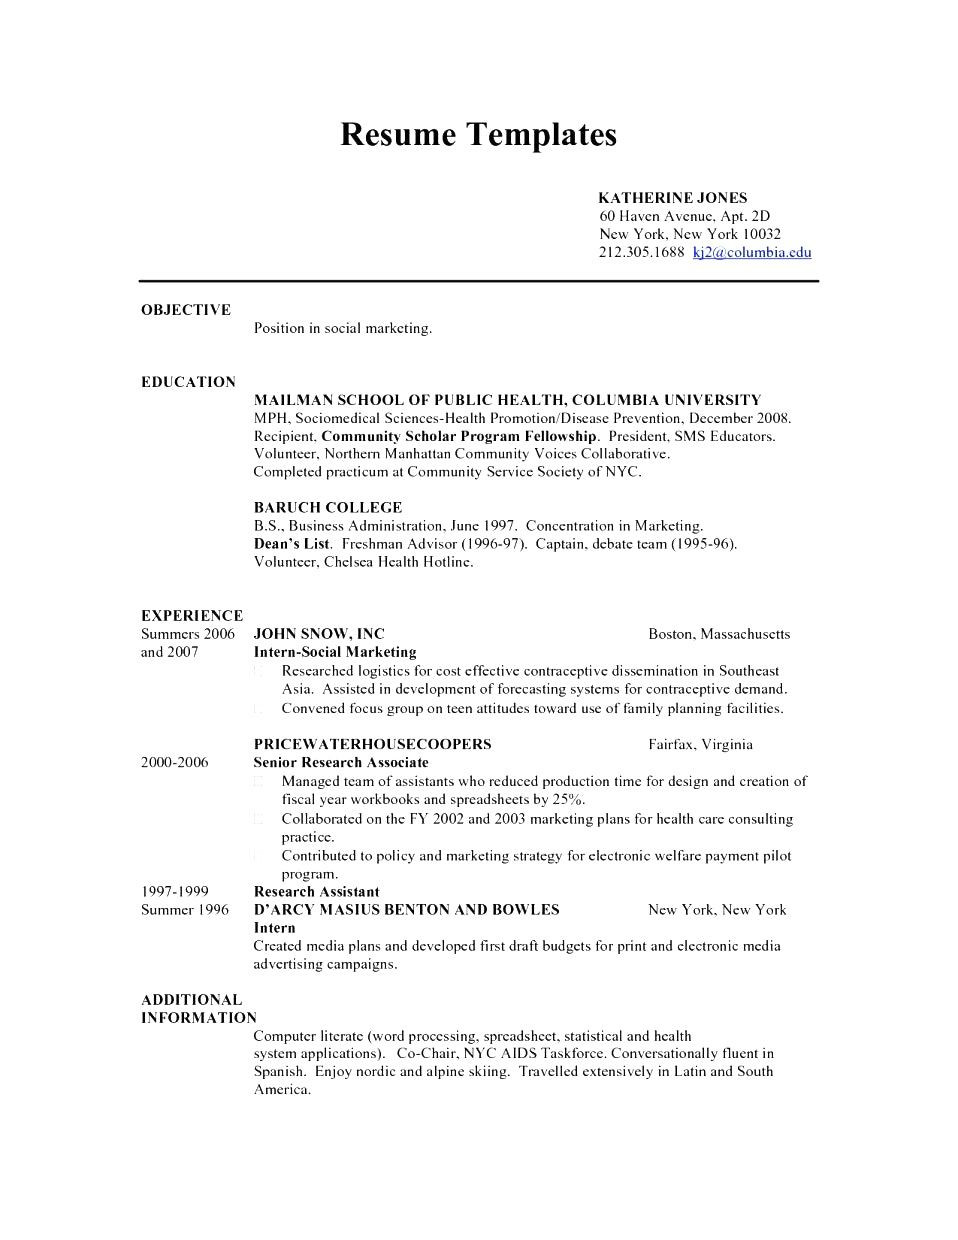 Sample Resume for 16 Year Old Pin On Diy and Crafts